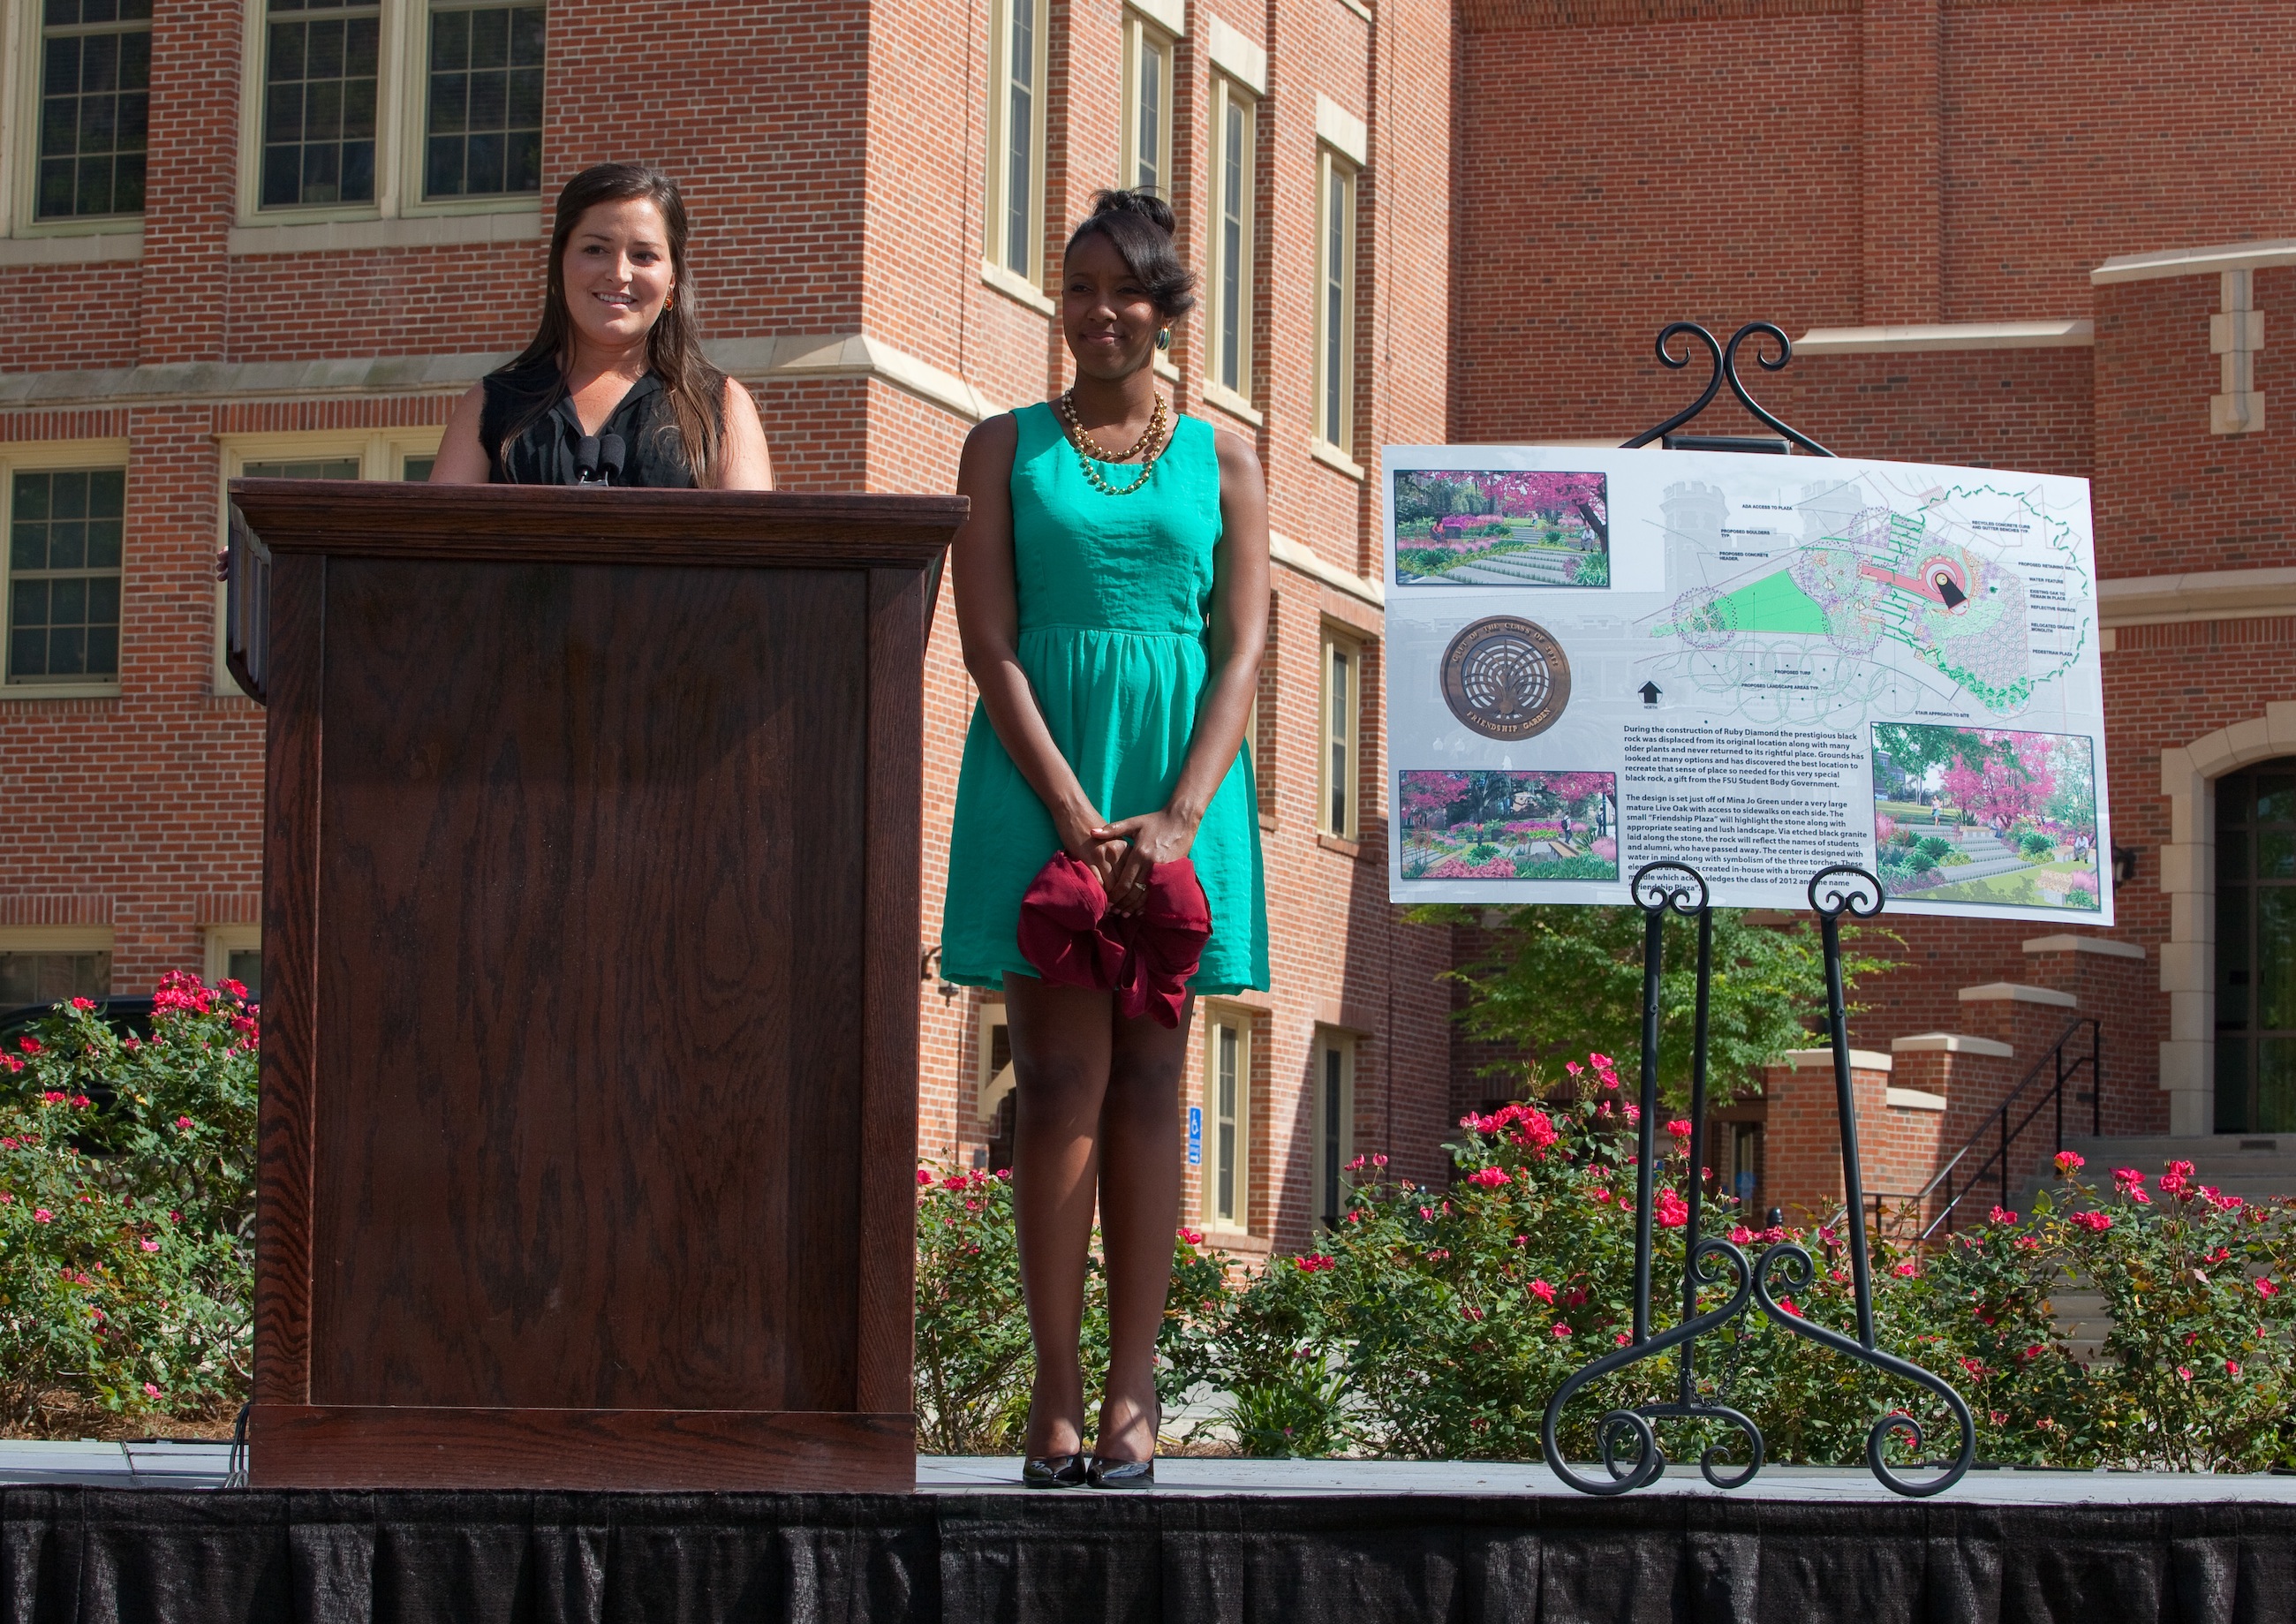 2012 Senior Class Council President Kimberly Siddle, left, and Treasurer Jasmine Styles reveal plans for a new garden to be located within Mina Jo Powell Green.